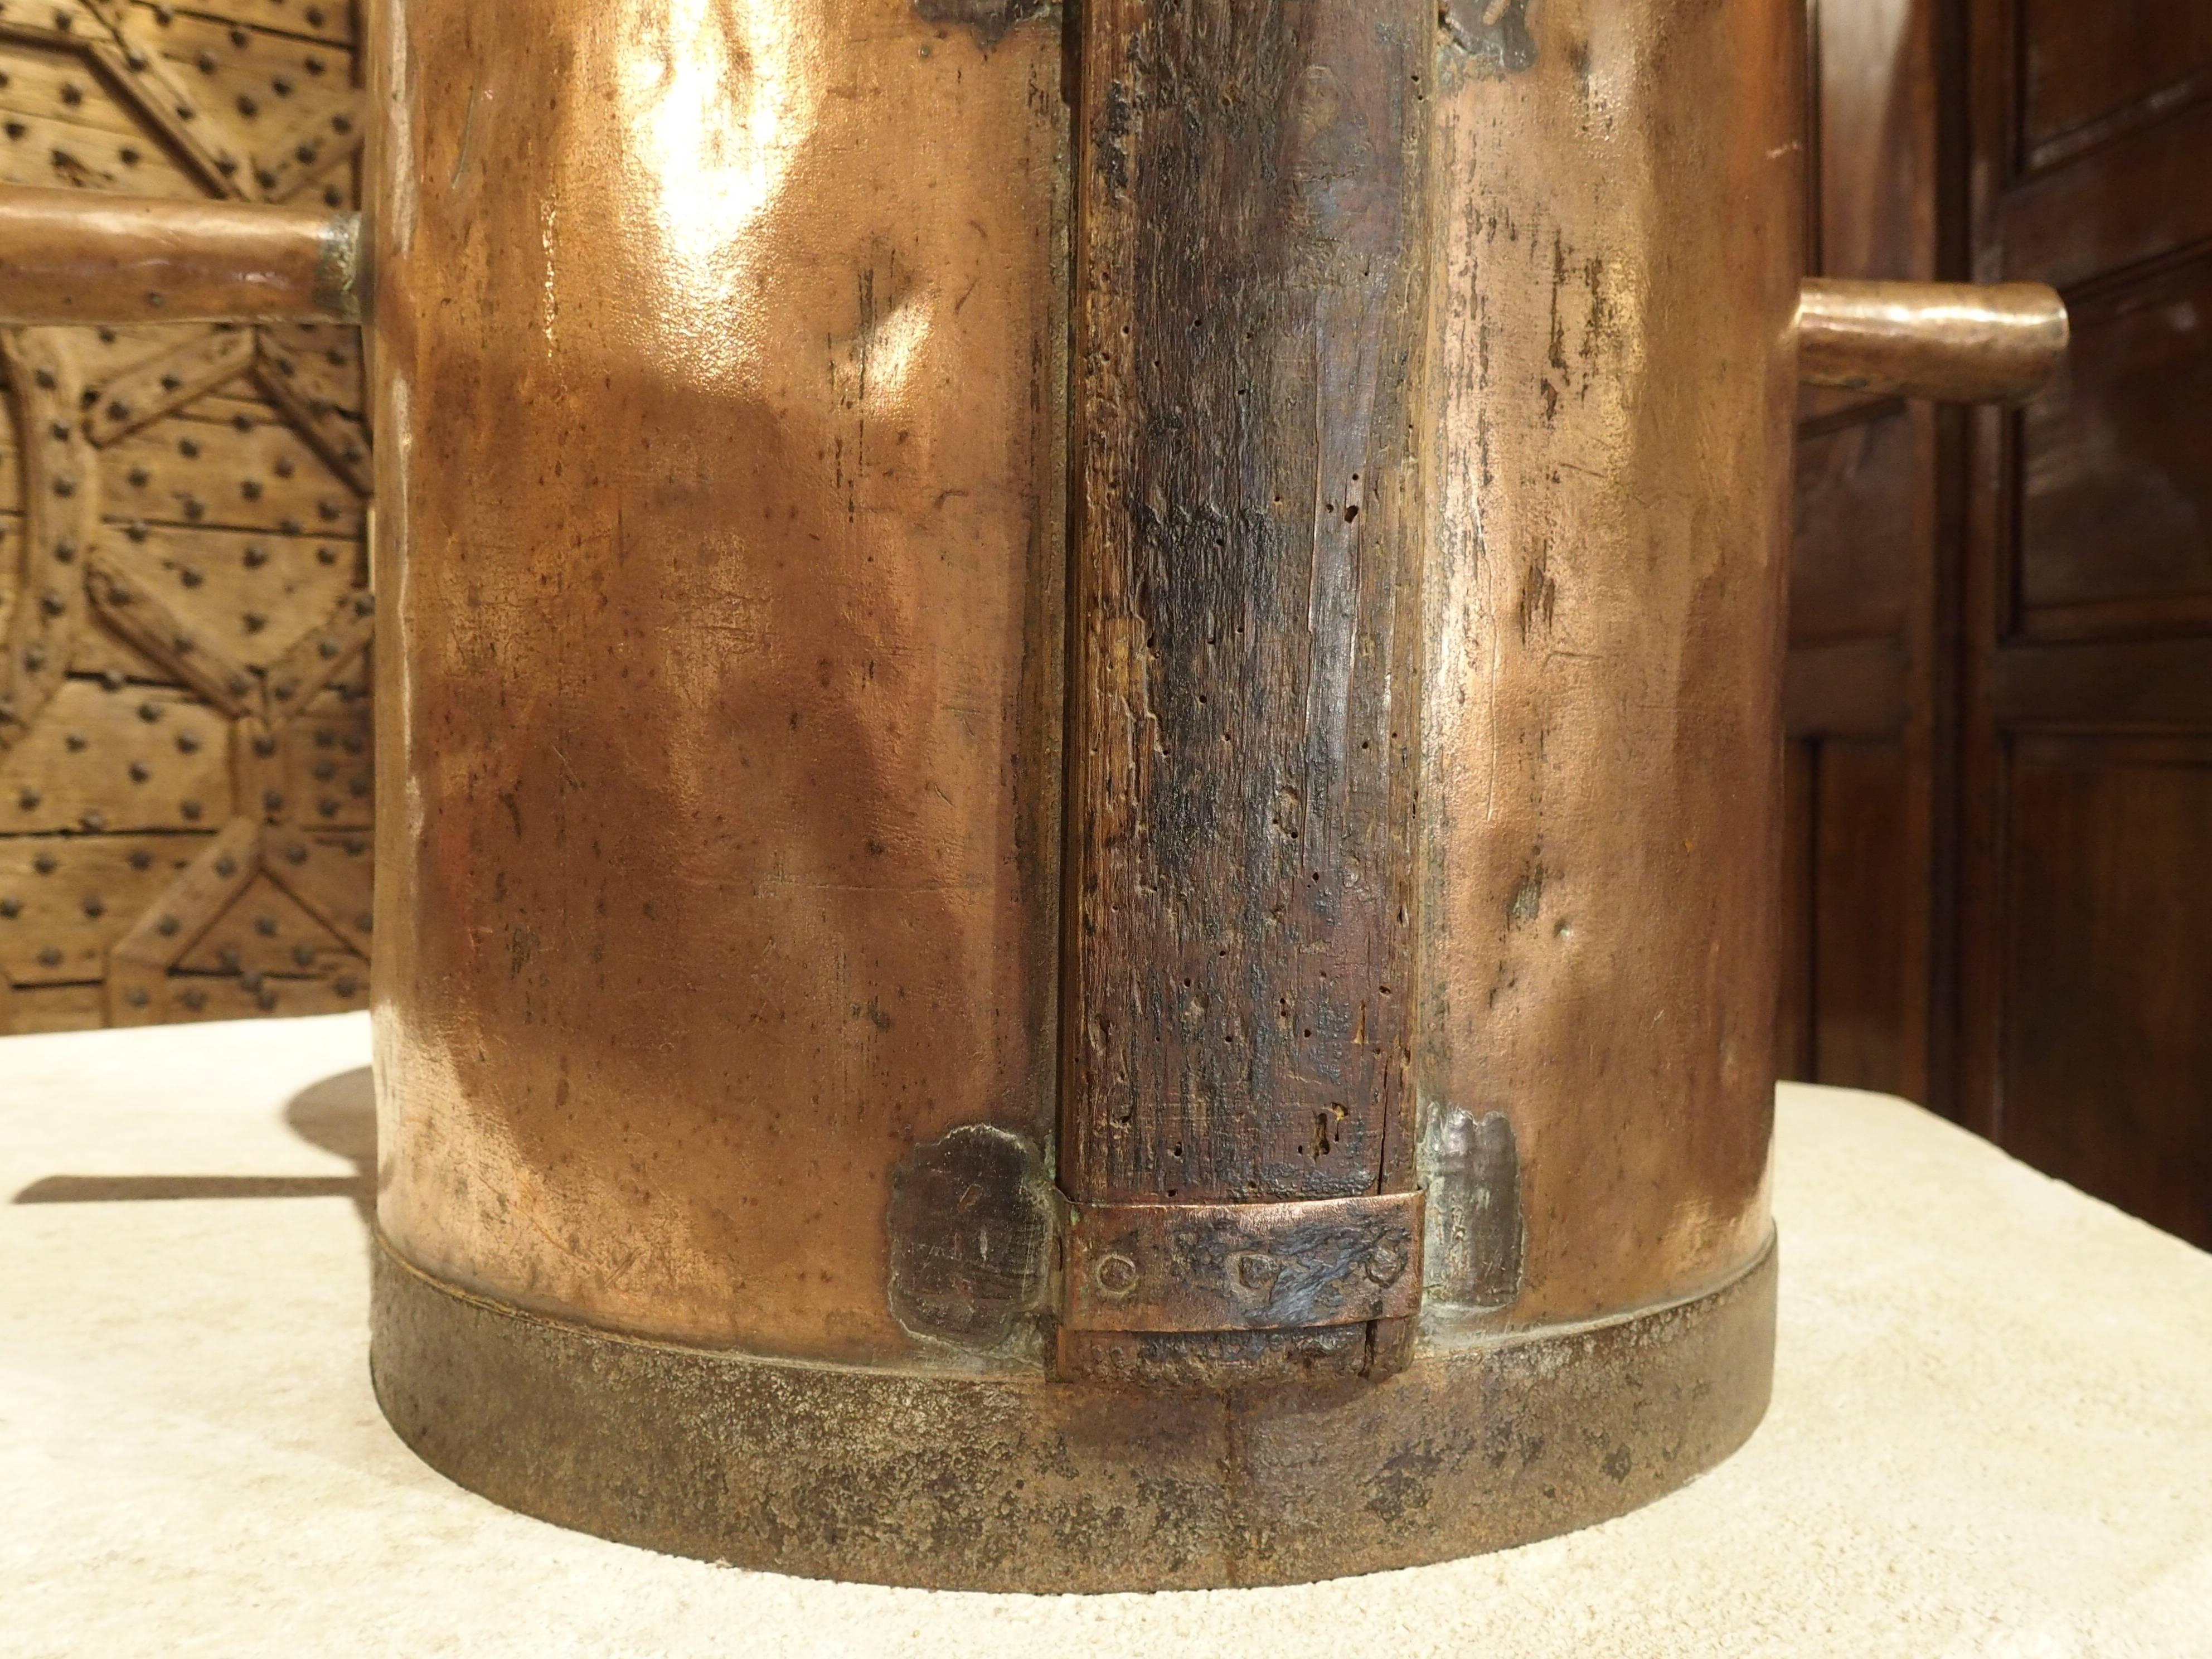 Antique Copper 50 Liter Wine Vessel from Carcassonne France, circa 1850 3